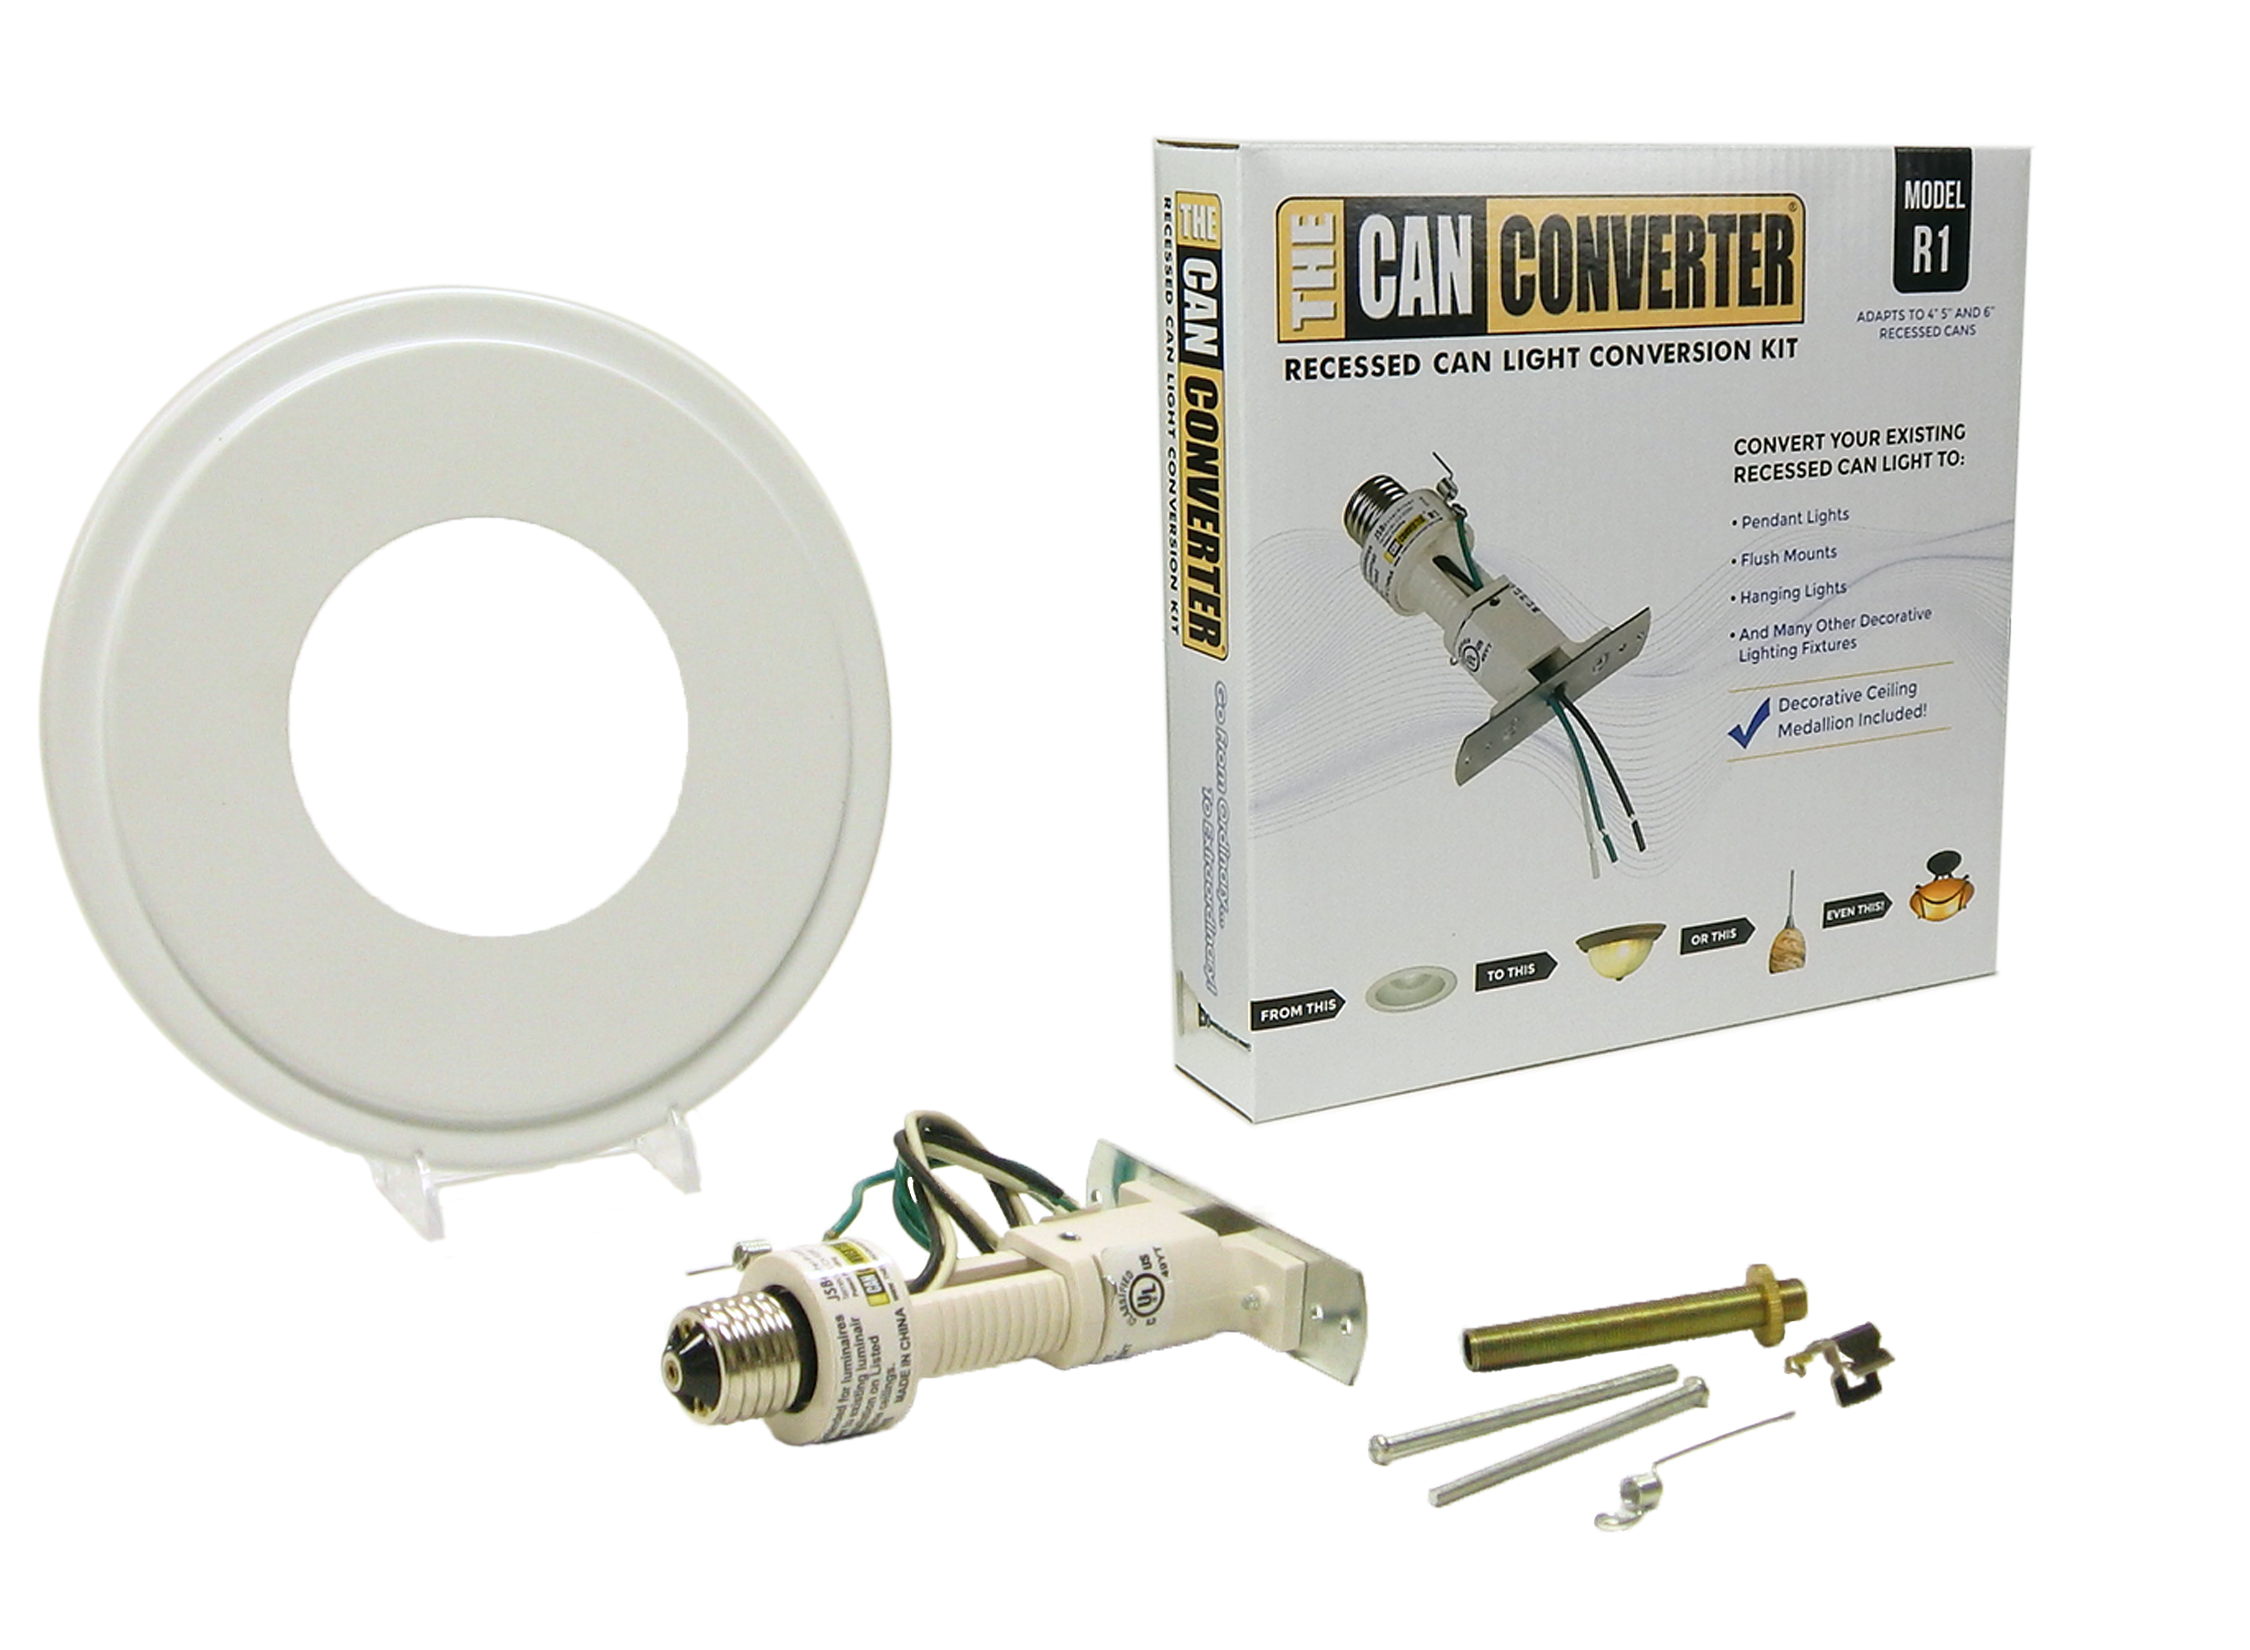 R1 Recessed Can Light Conversion Kit